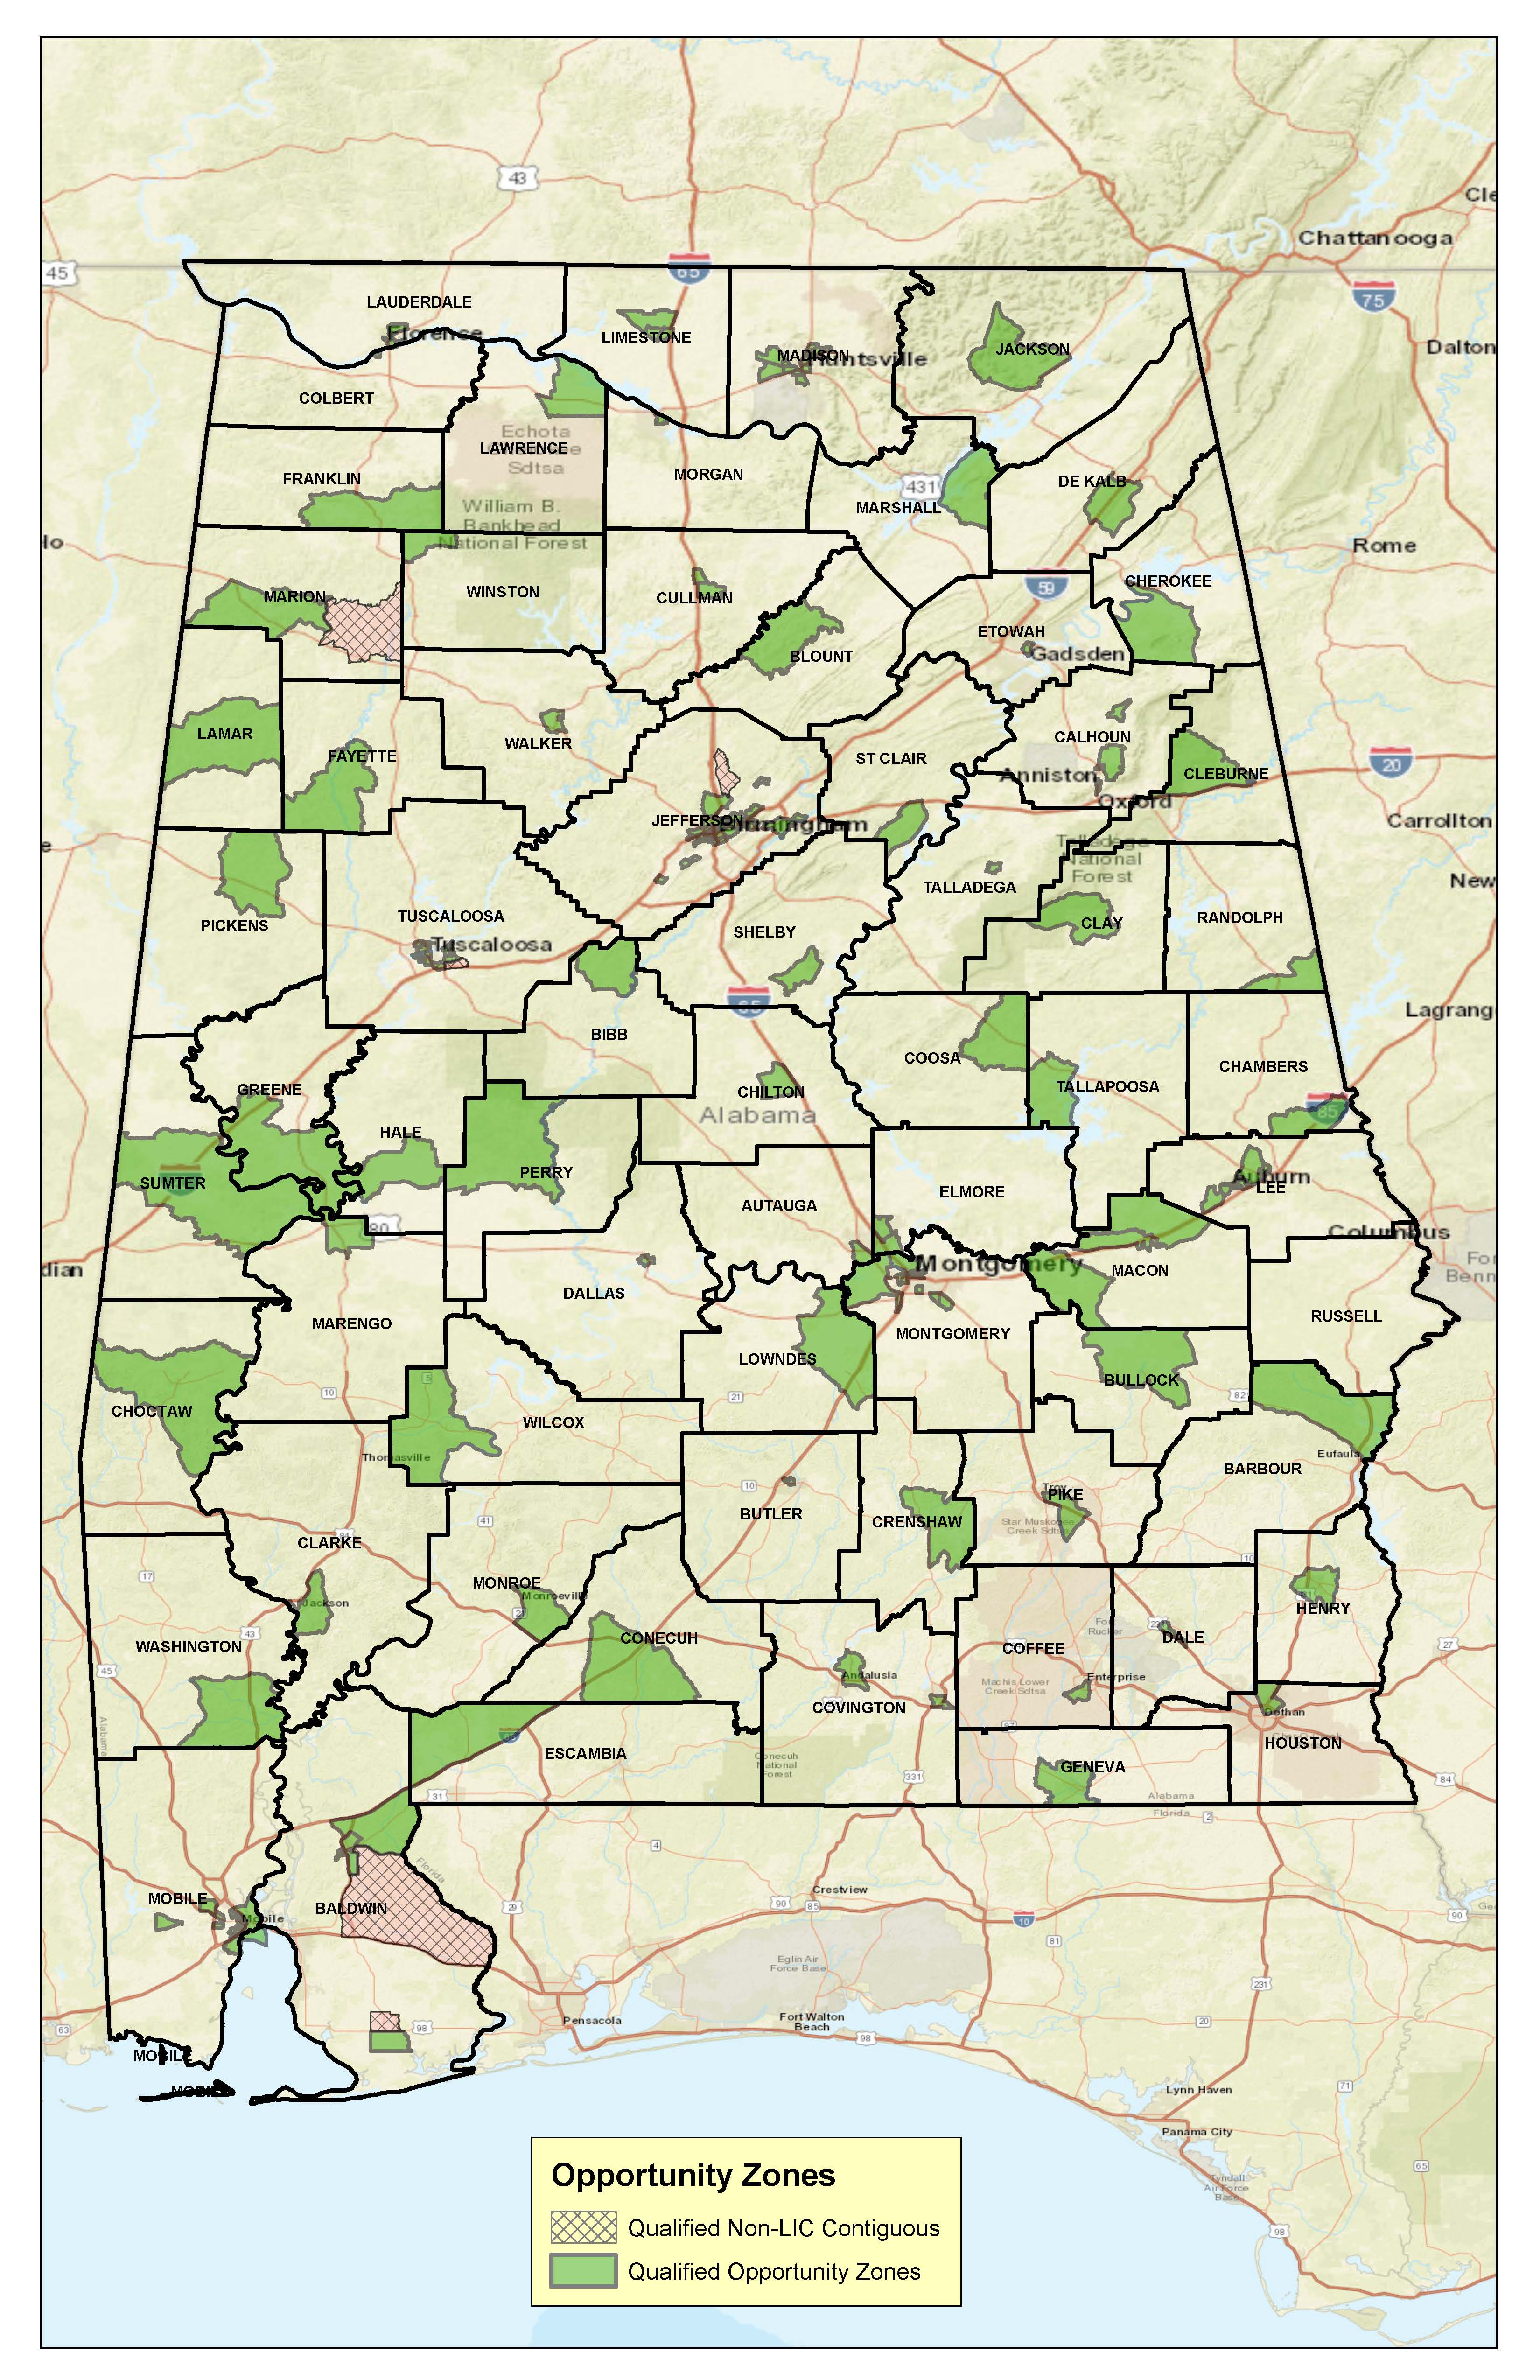 Governor Ivey Submits Opportunity Zone Nominations